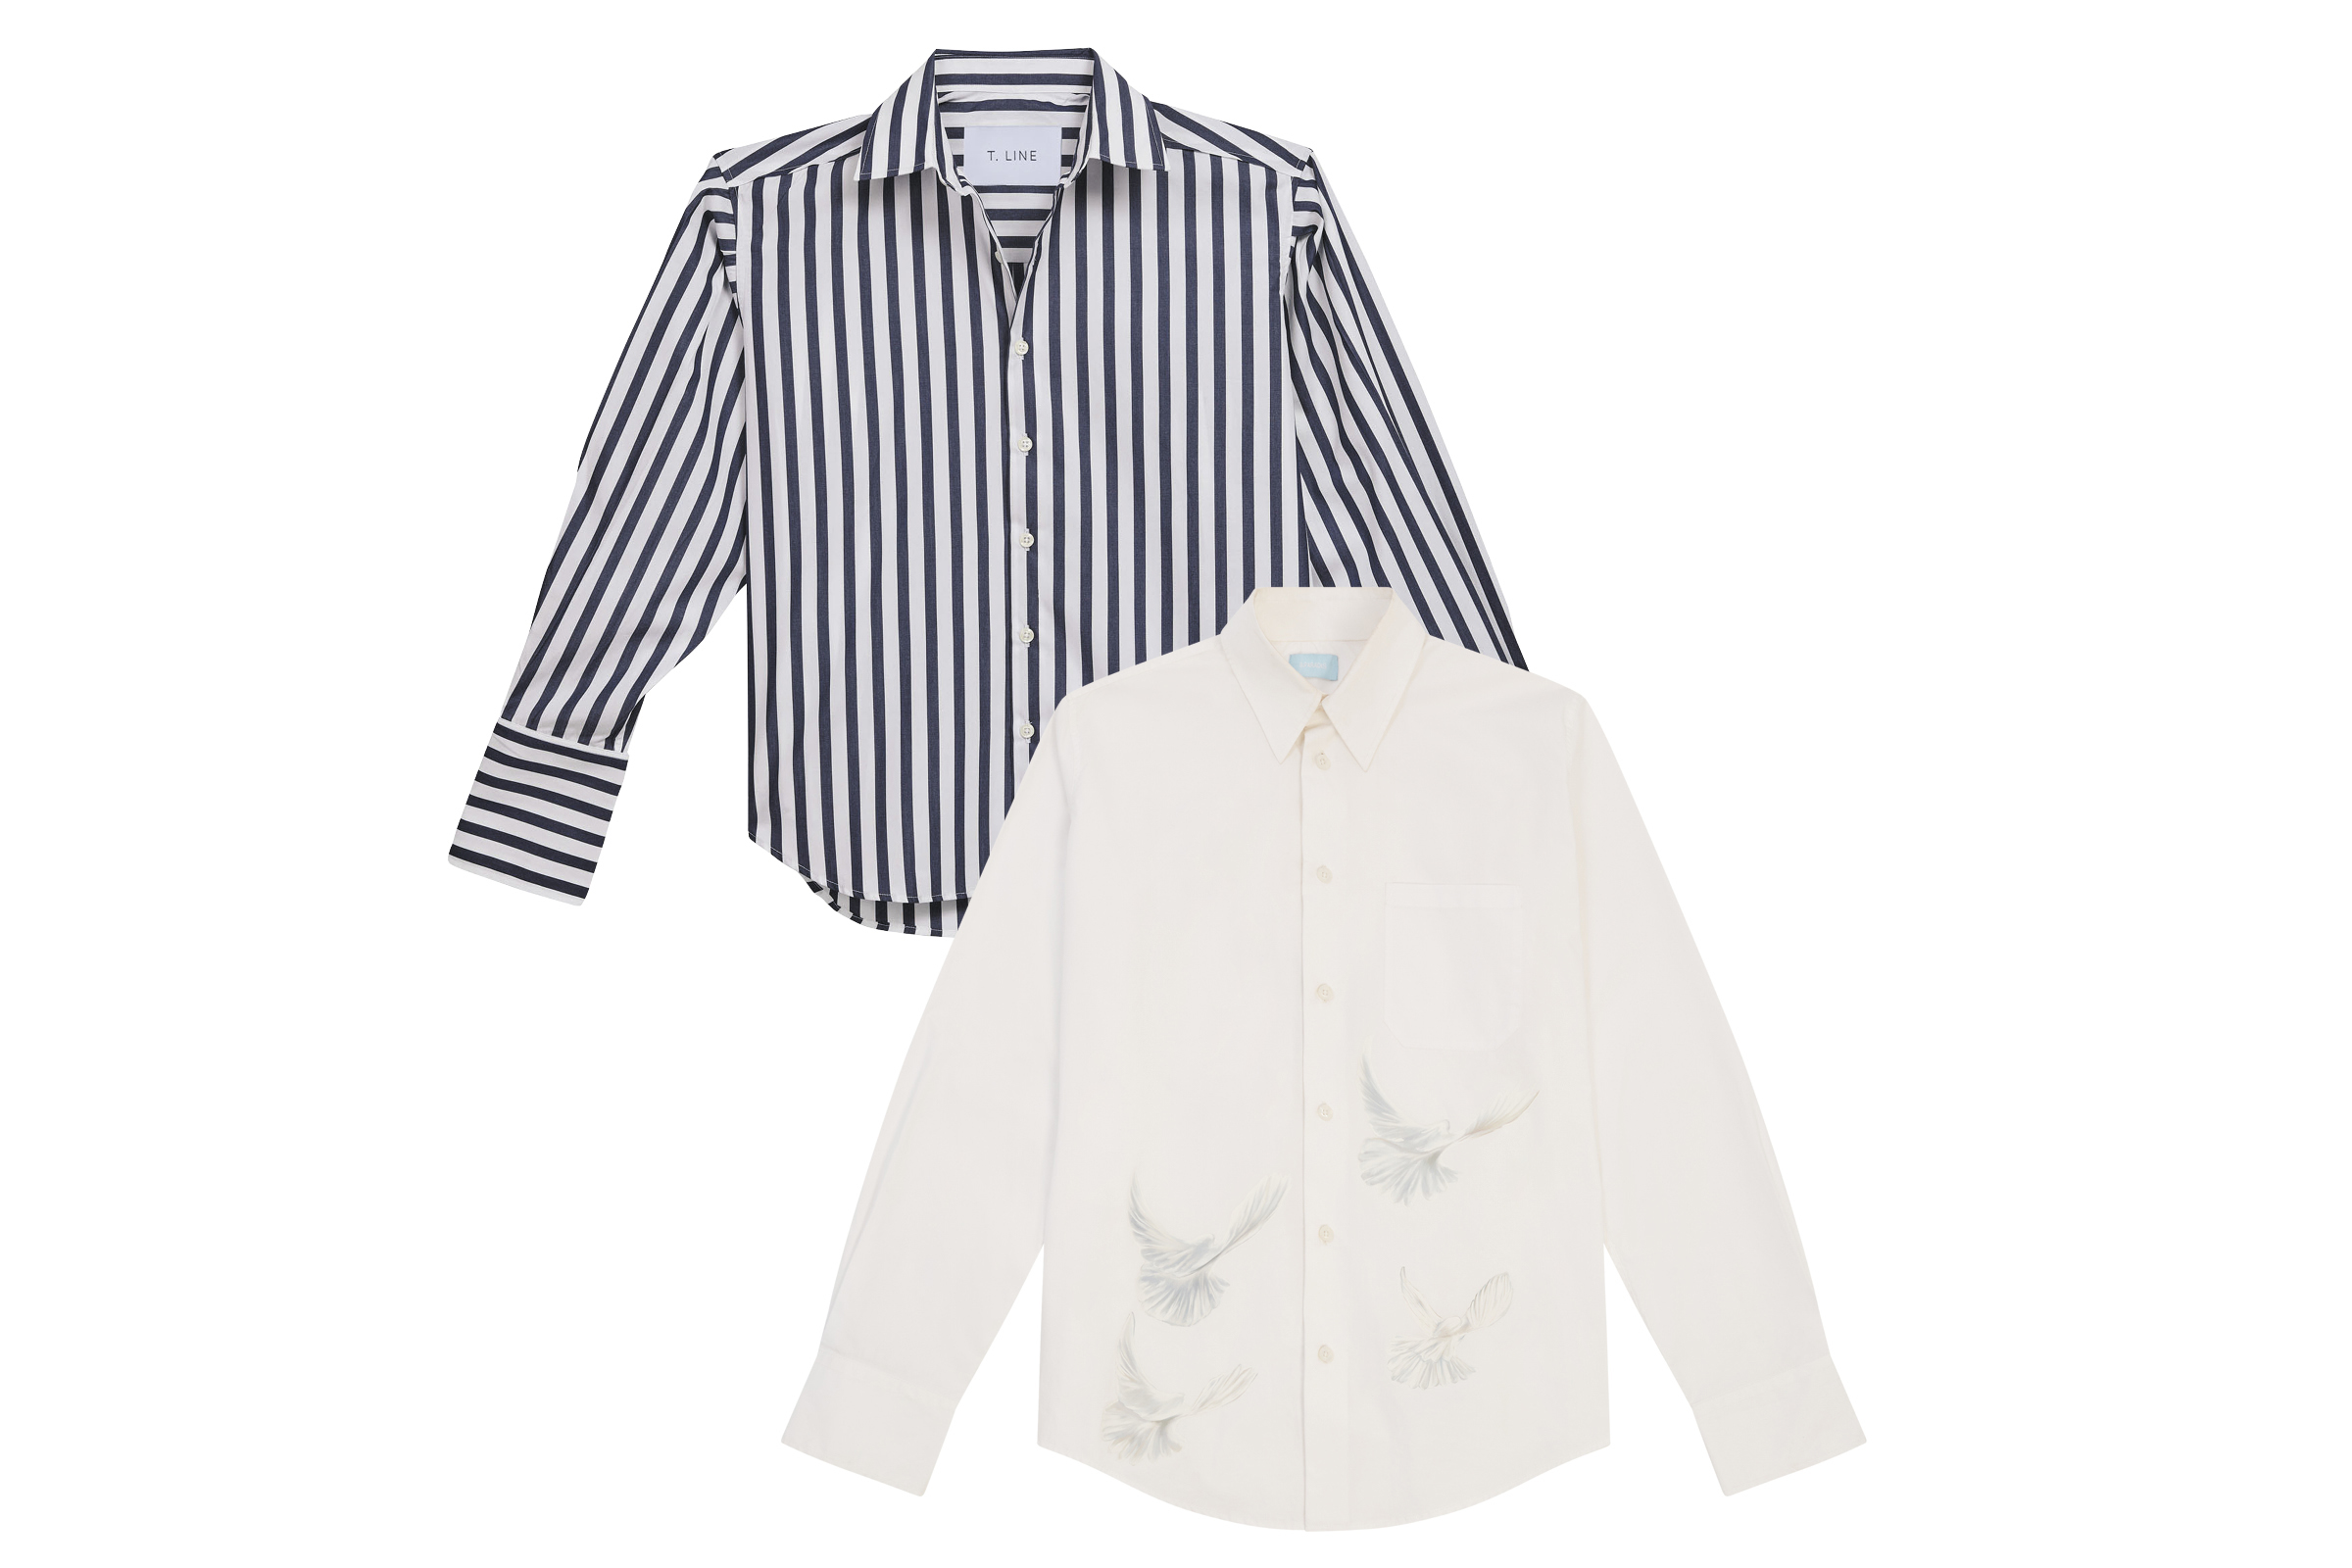 Why the cotton shirt in your wardrobe is the new must-have